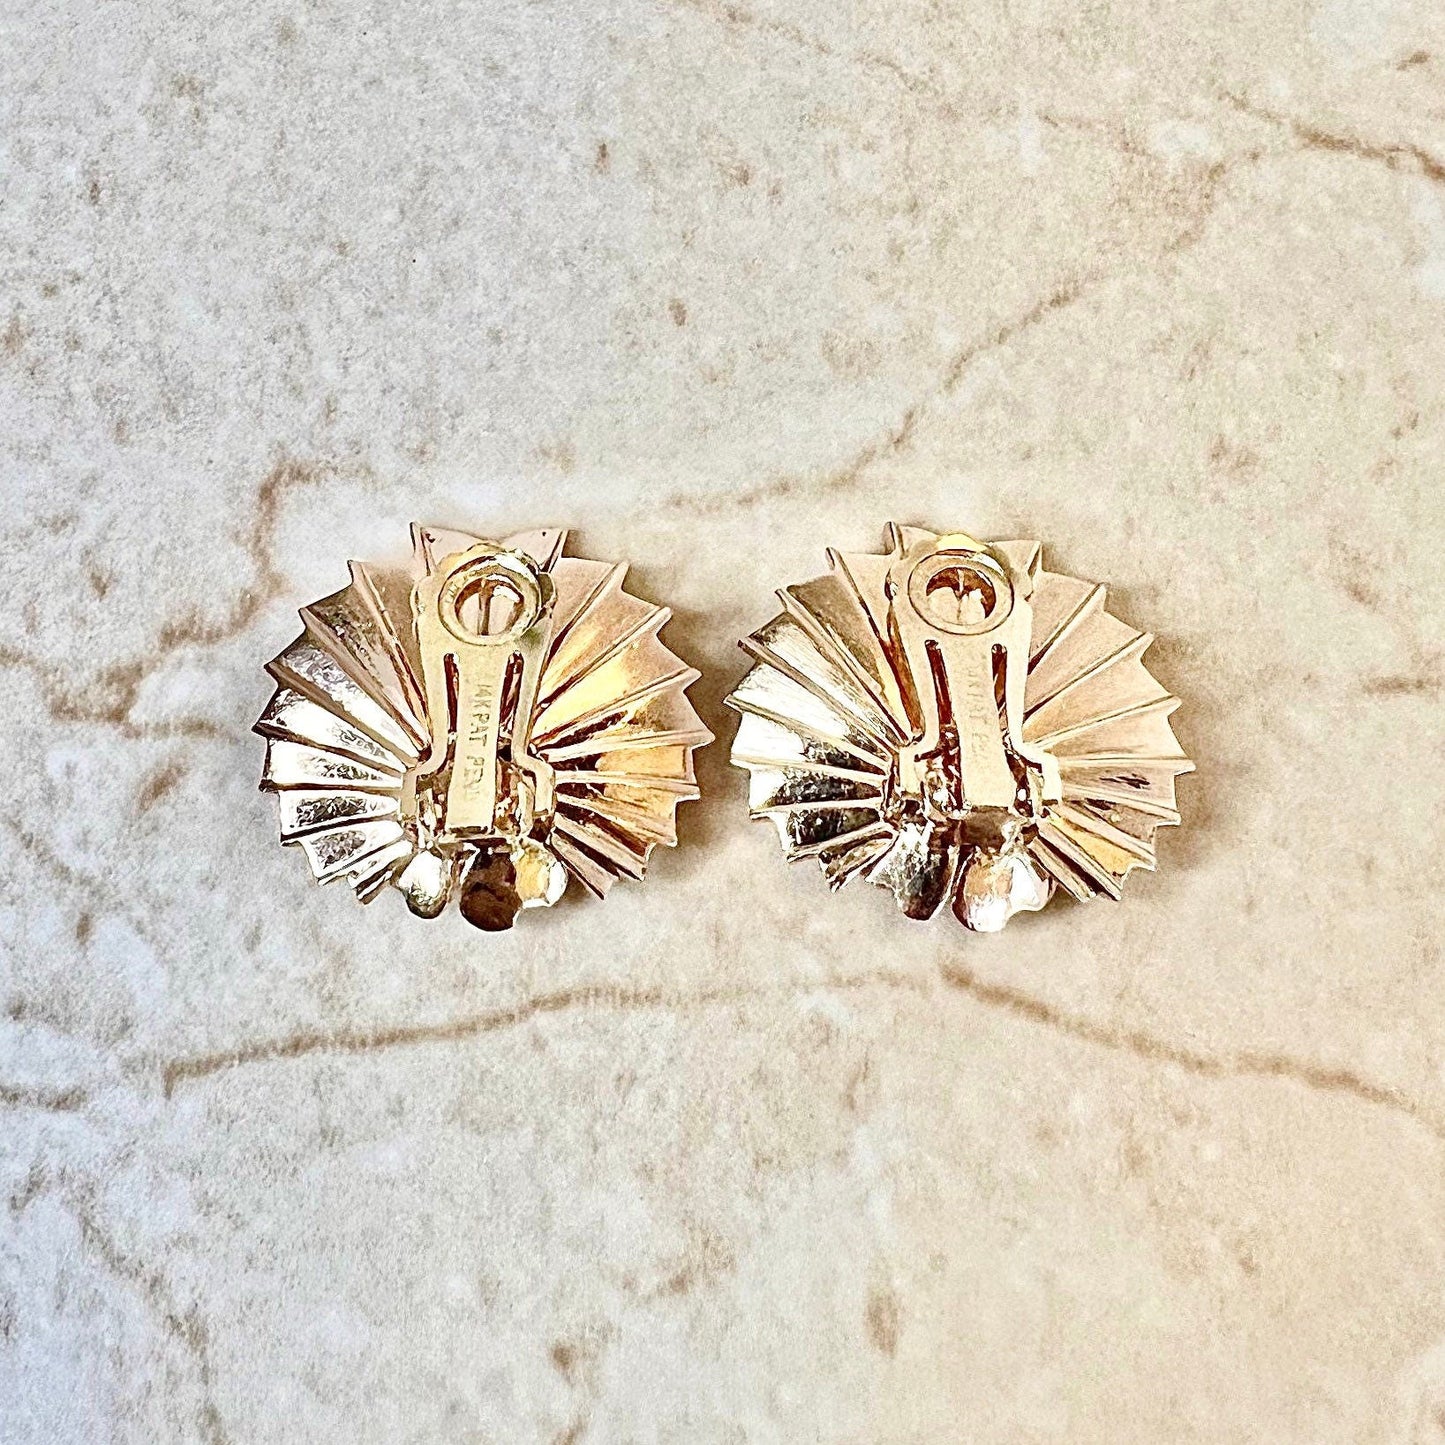 Vintage 1940’s Retro 14K Diamond And Ruby Clip On Earrings - Rose Gold Ruby Earrings - Retro Earrings - July Birthstone - Best Gift For Her